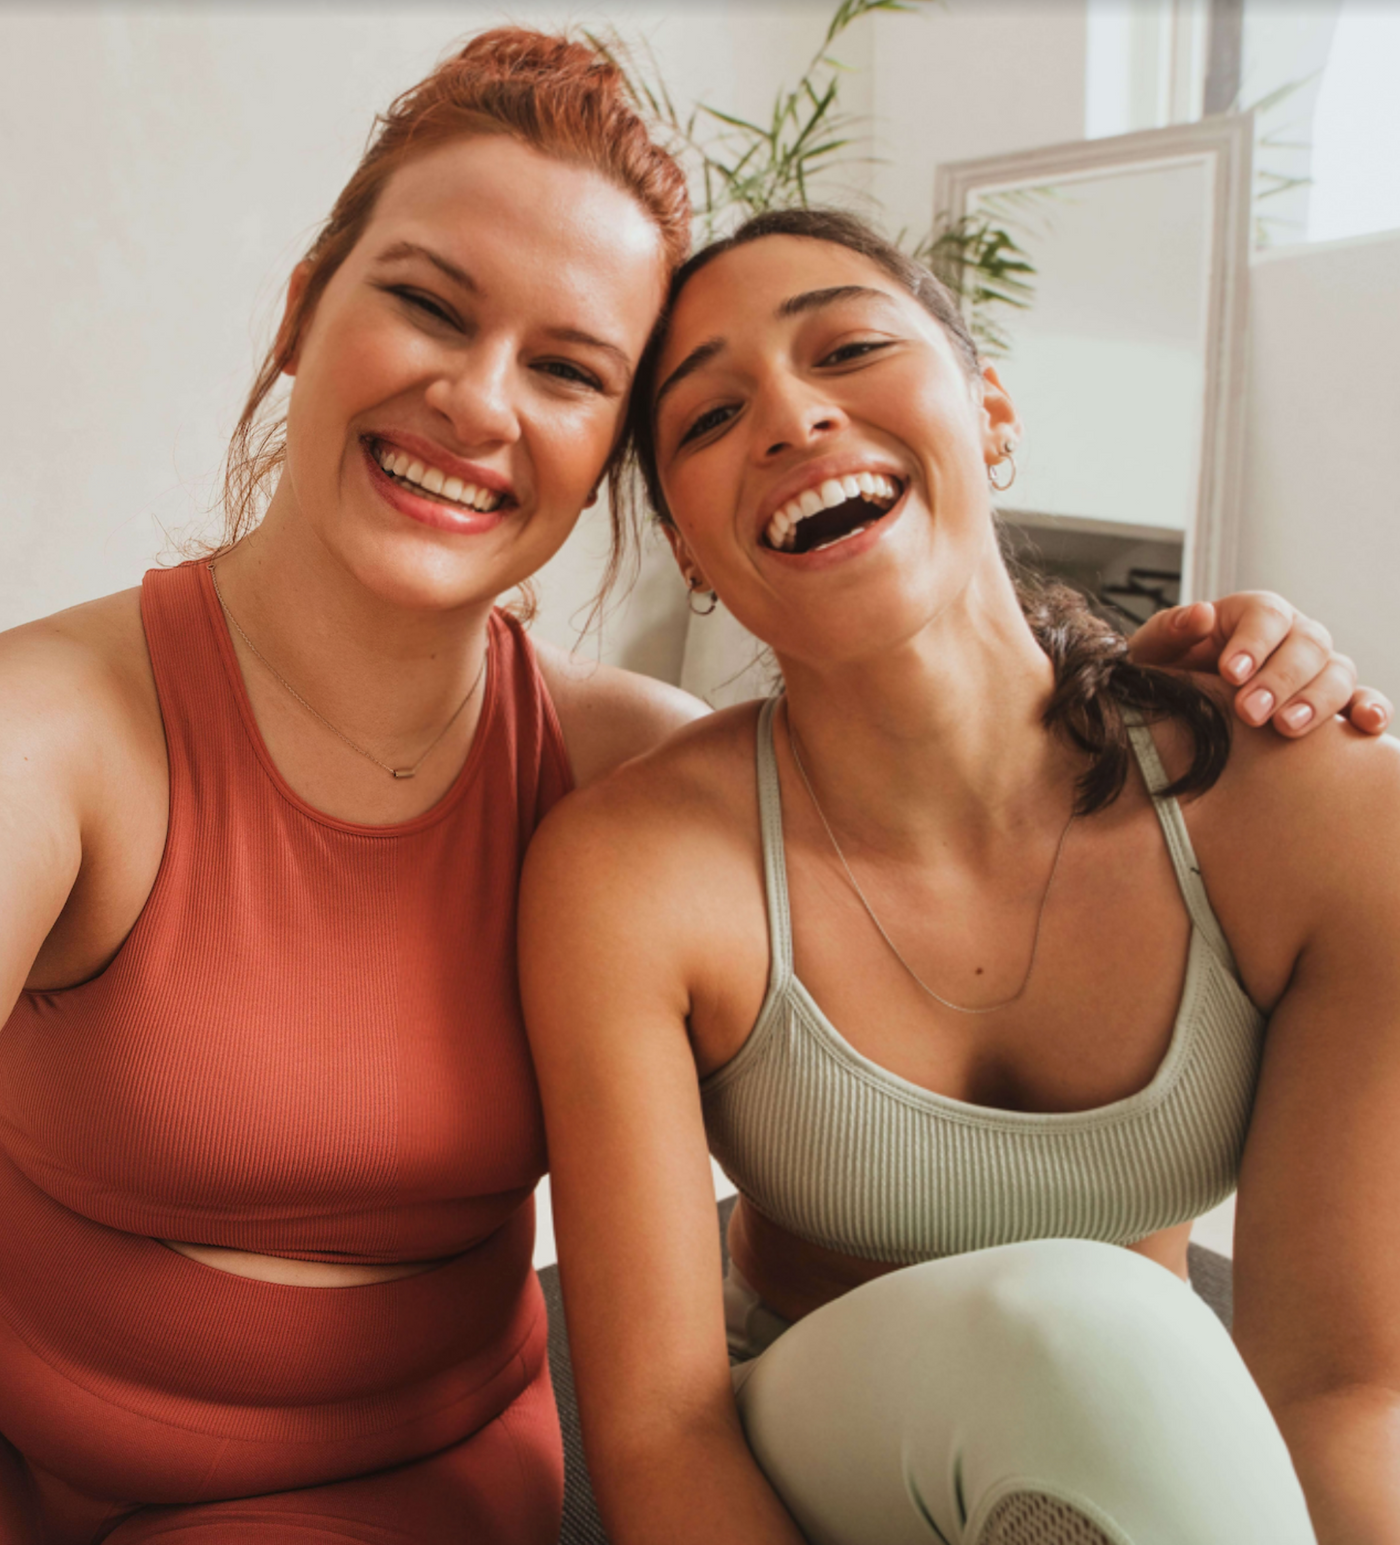 Two healthy women laughing